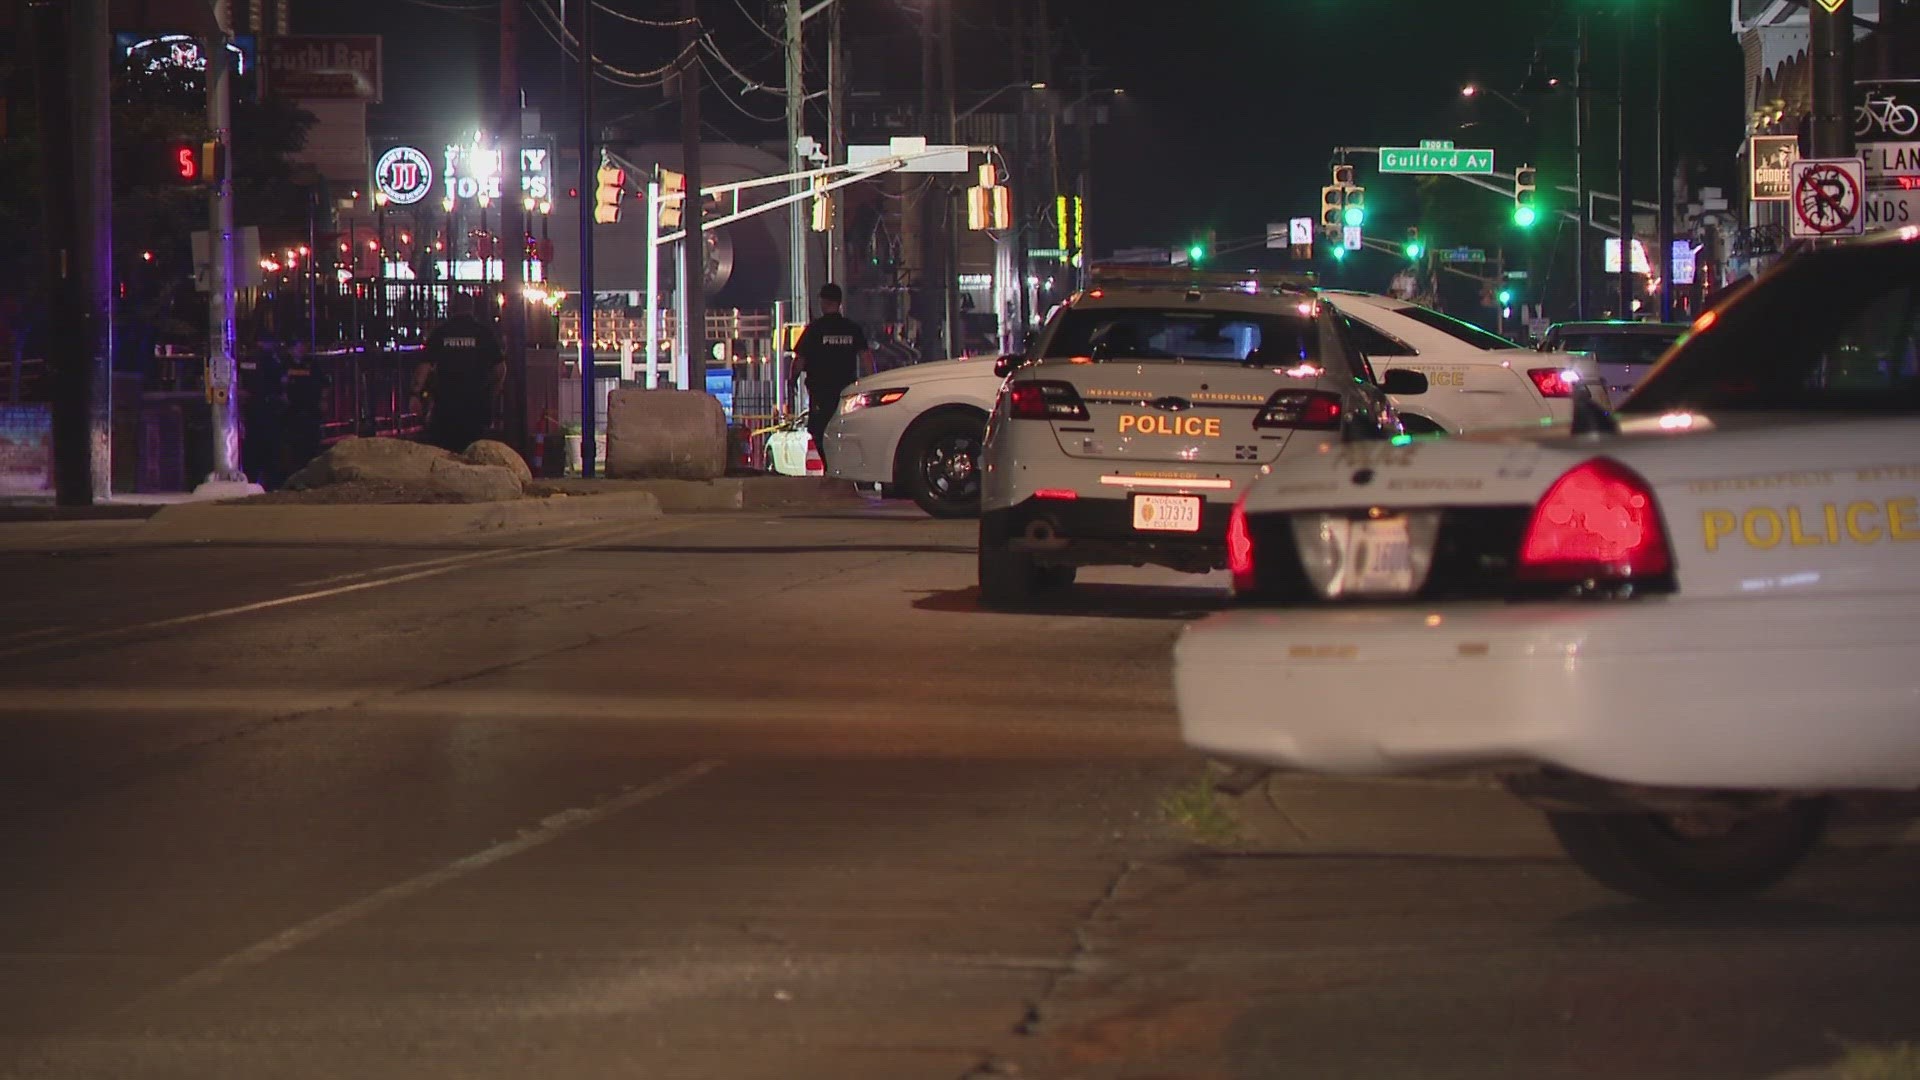 Around 2:30 a.m. Sunday morning, officers found four people shot in the 800 block of Broad Ripple Avenue, which is right near Carrollton Avenue.